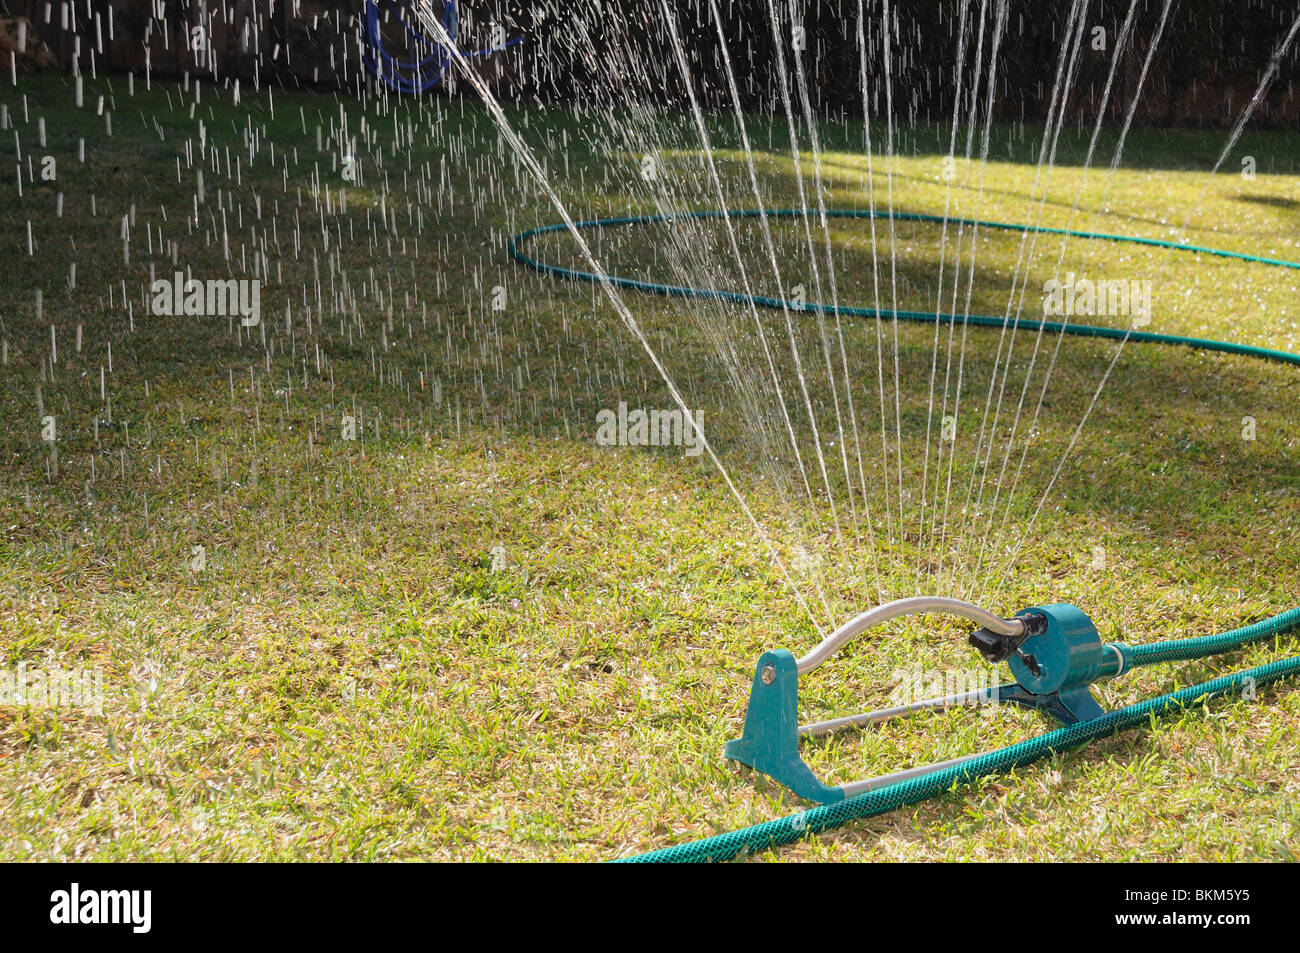 Watering a couch grass garden. Stock Photo